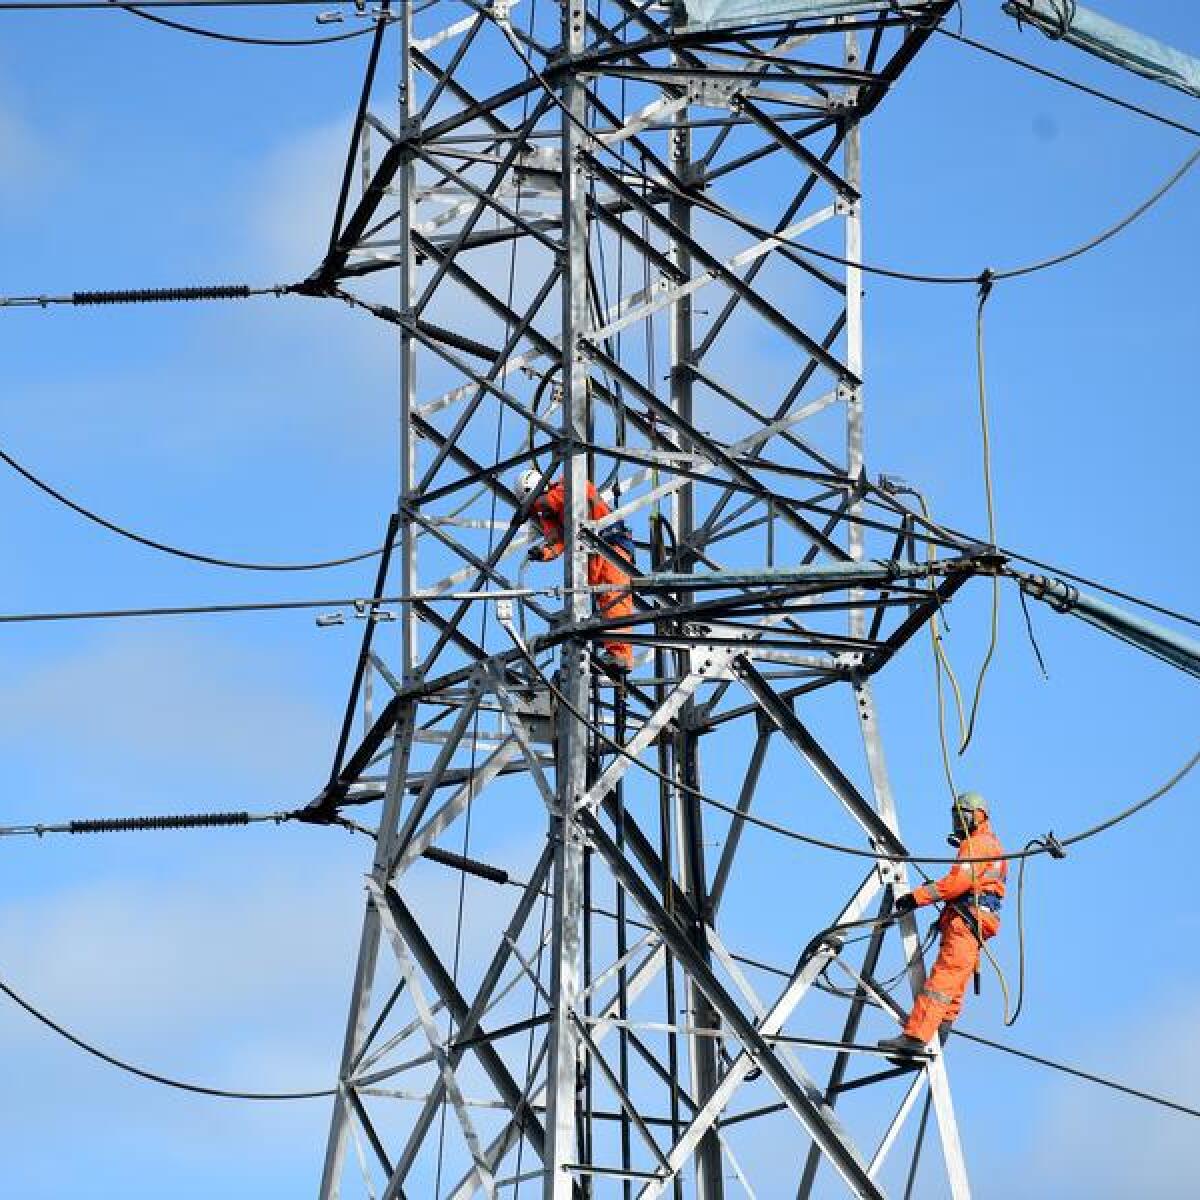 Workers on an electricity pylon in suburban Sydney (file image)